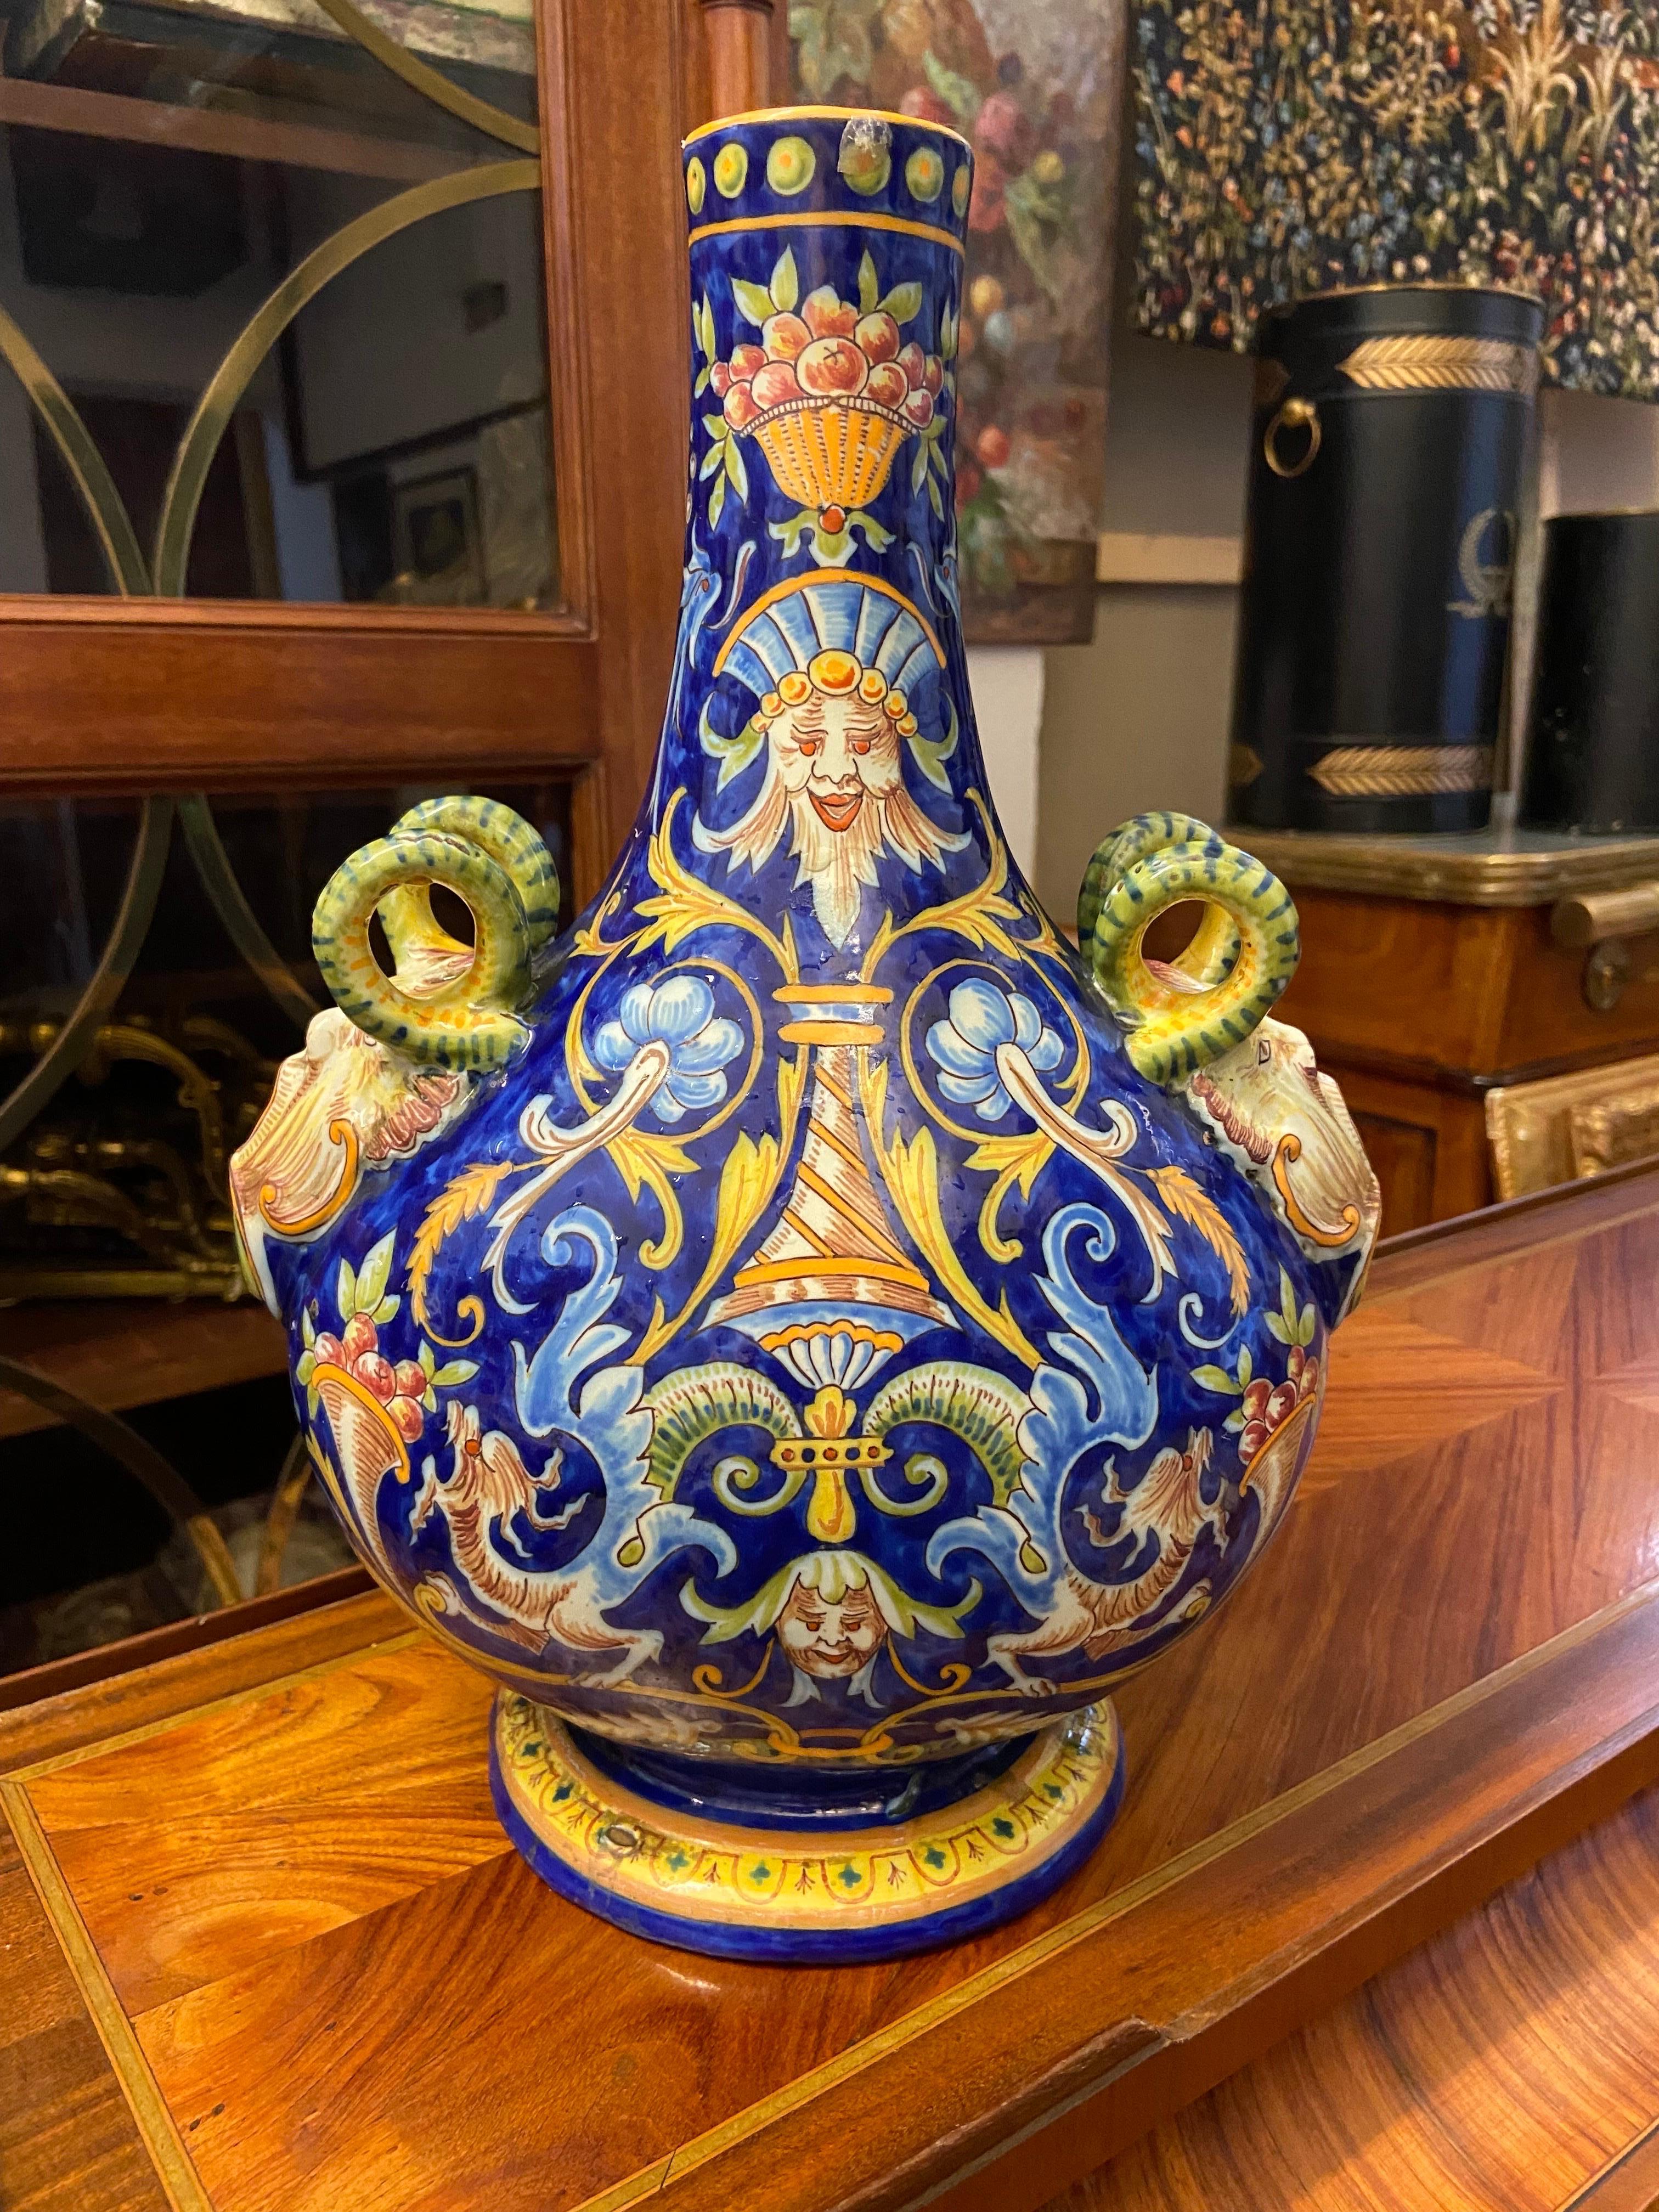 A French Desvres faience vase with hand-painted floral decoration in the traditional colors of yellow, orange and green on blue ground. Exceptional handles with detailed figures and faces. Marked at the underside. 
France, circa 1890.